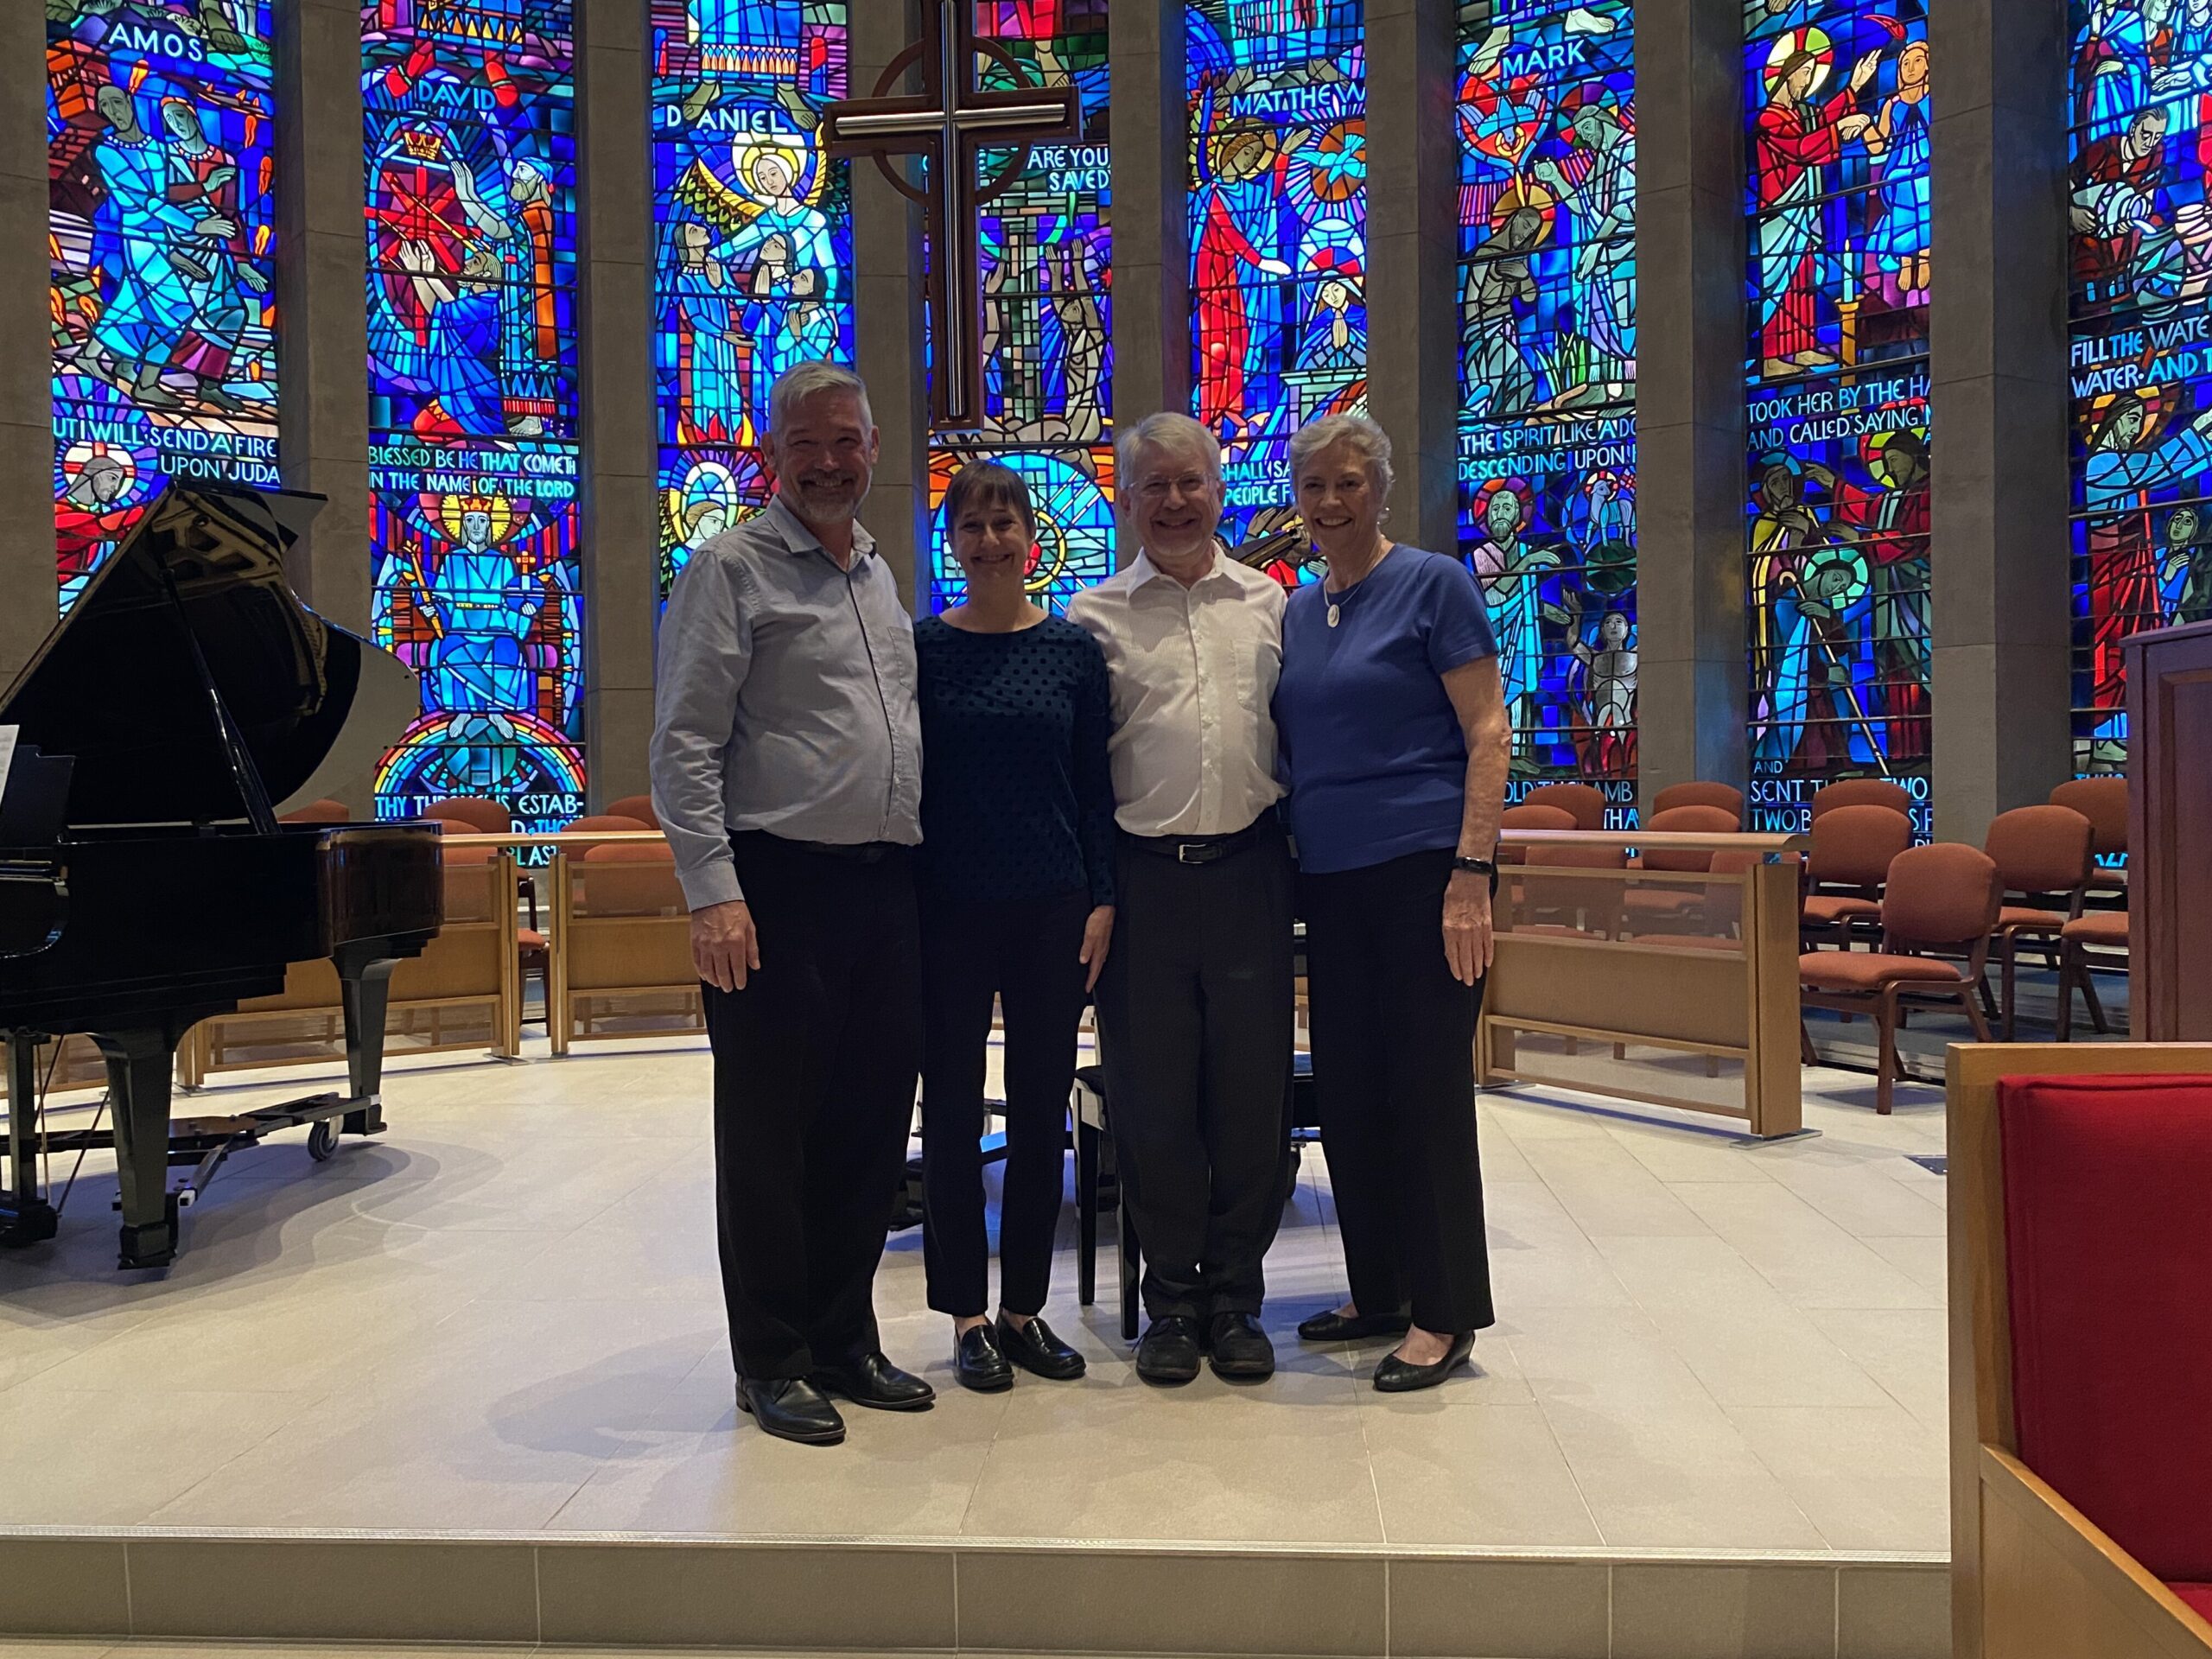 The four members of the Piano Ensemble pose in front of the church's illuminated stained glass windows.